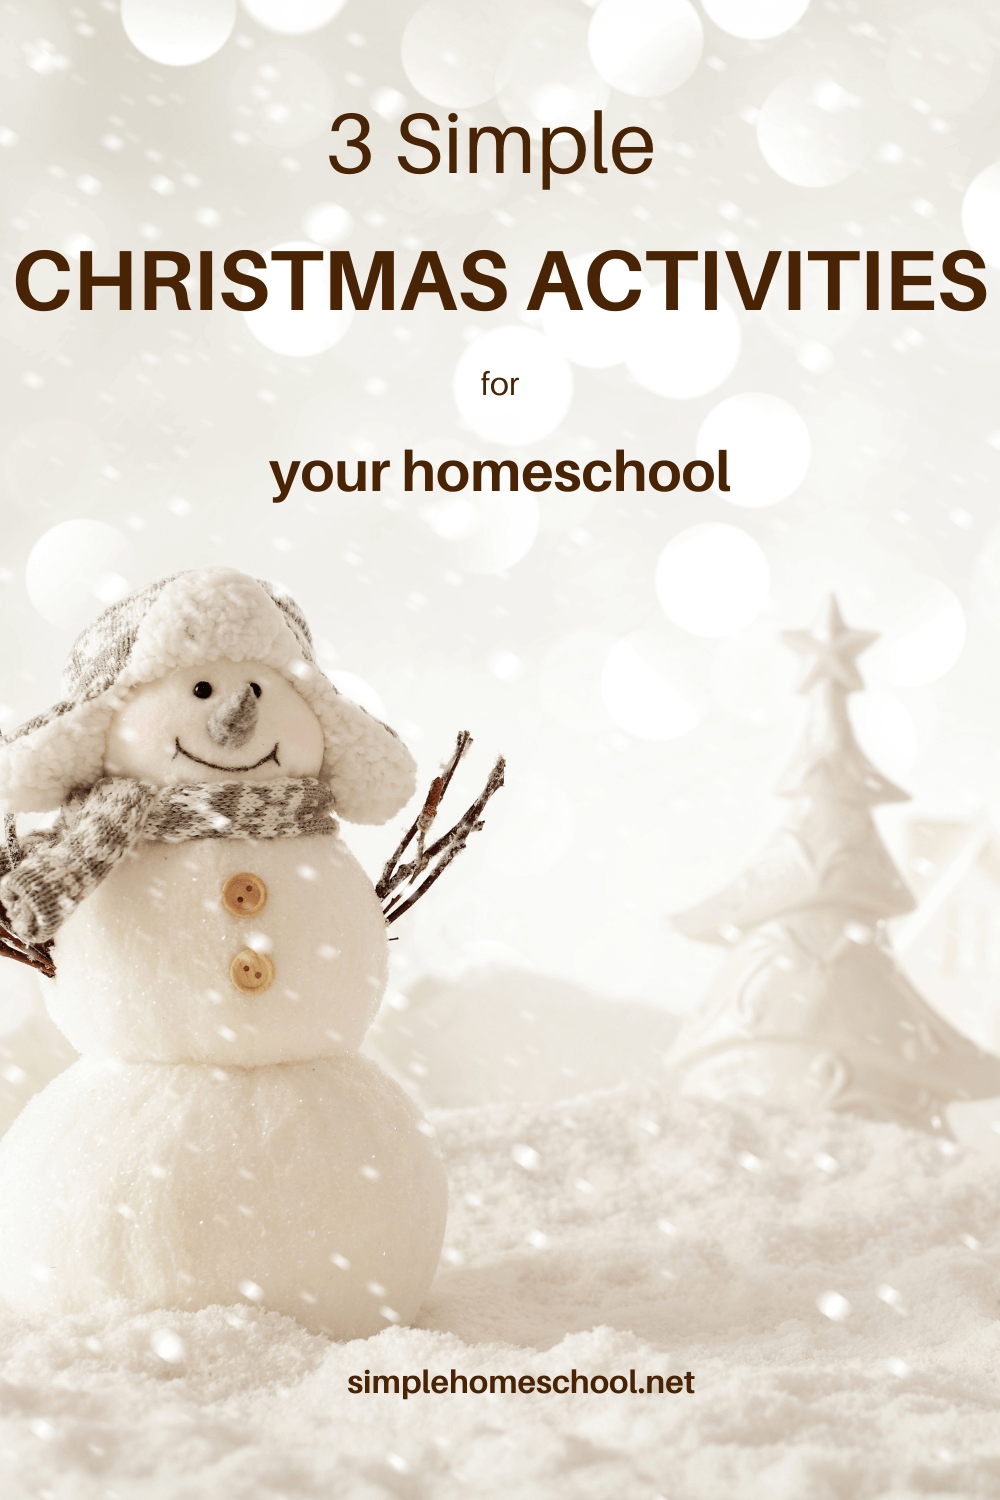 3 Simple Christmas Activities for Your Homeschool: If you're looking for simple activities to help you celebrate Christmas with your children, then you can't go wrong with cooking, art, and music!